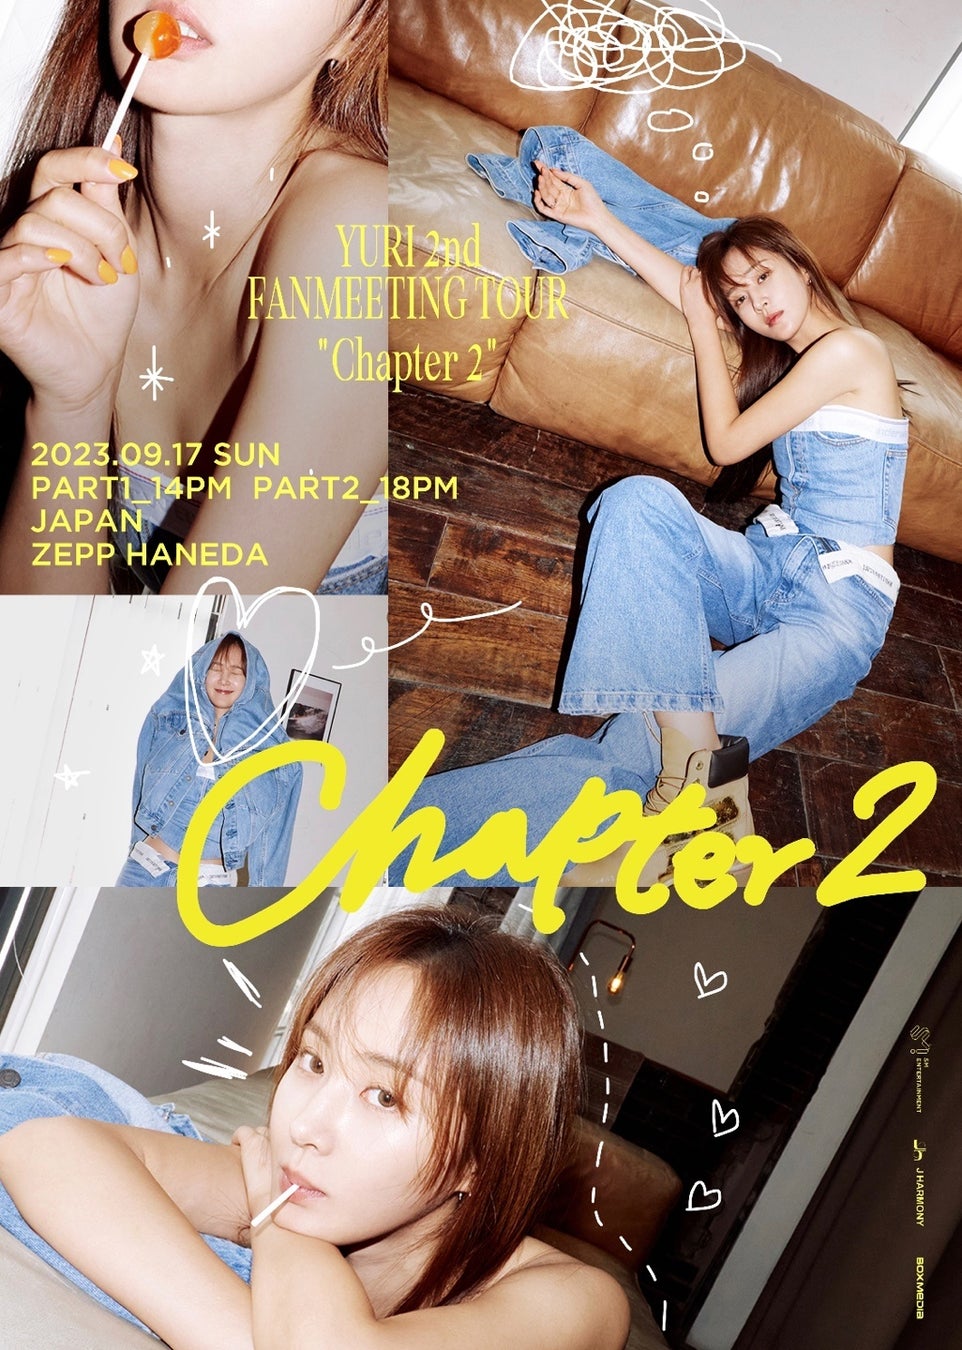 2023 YURI 2nd FANMEETING TOUR [Chapter 2] in TOKYO 開催決定！！のサブ画像1